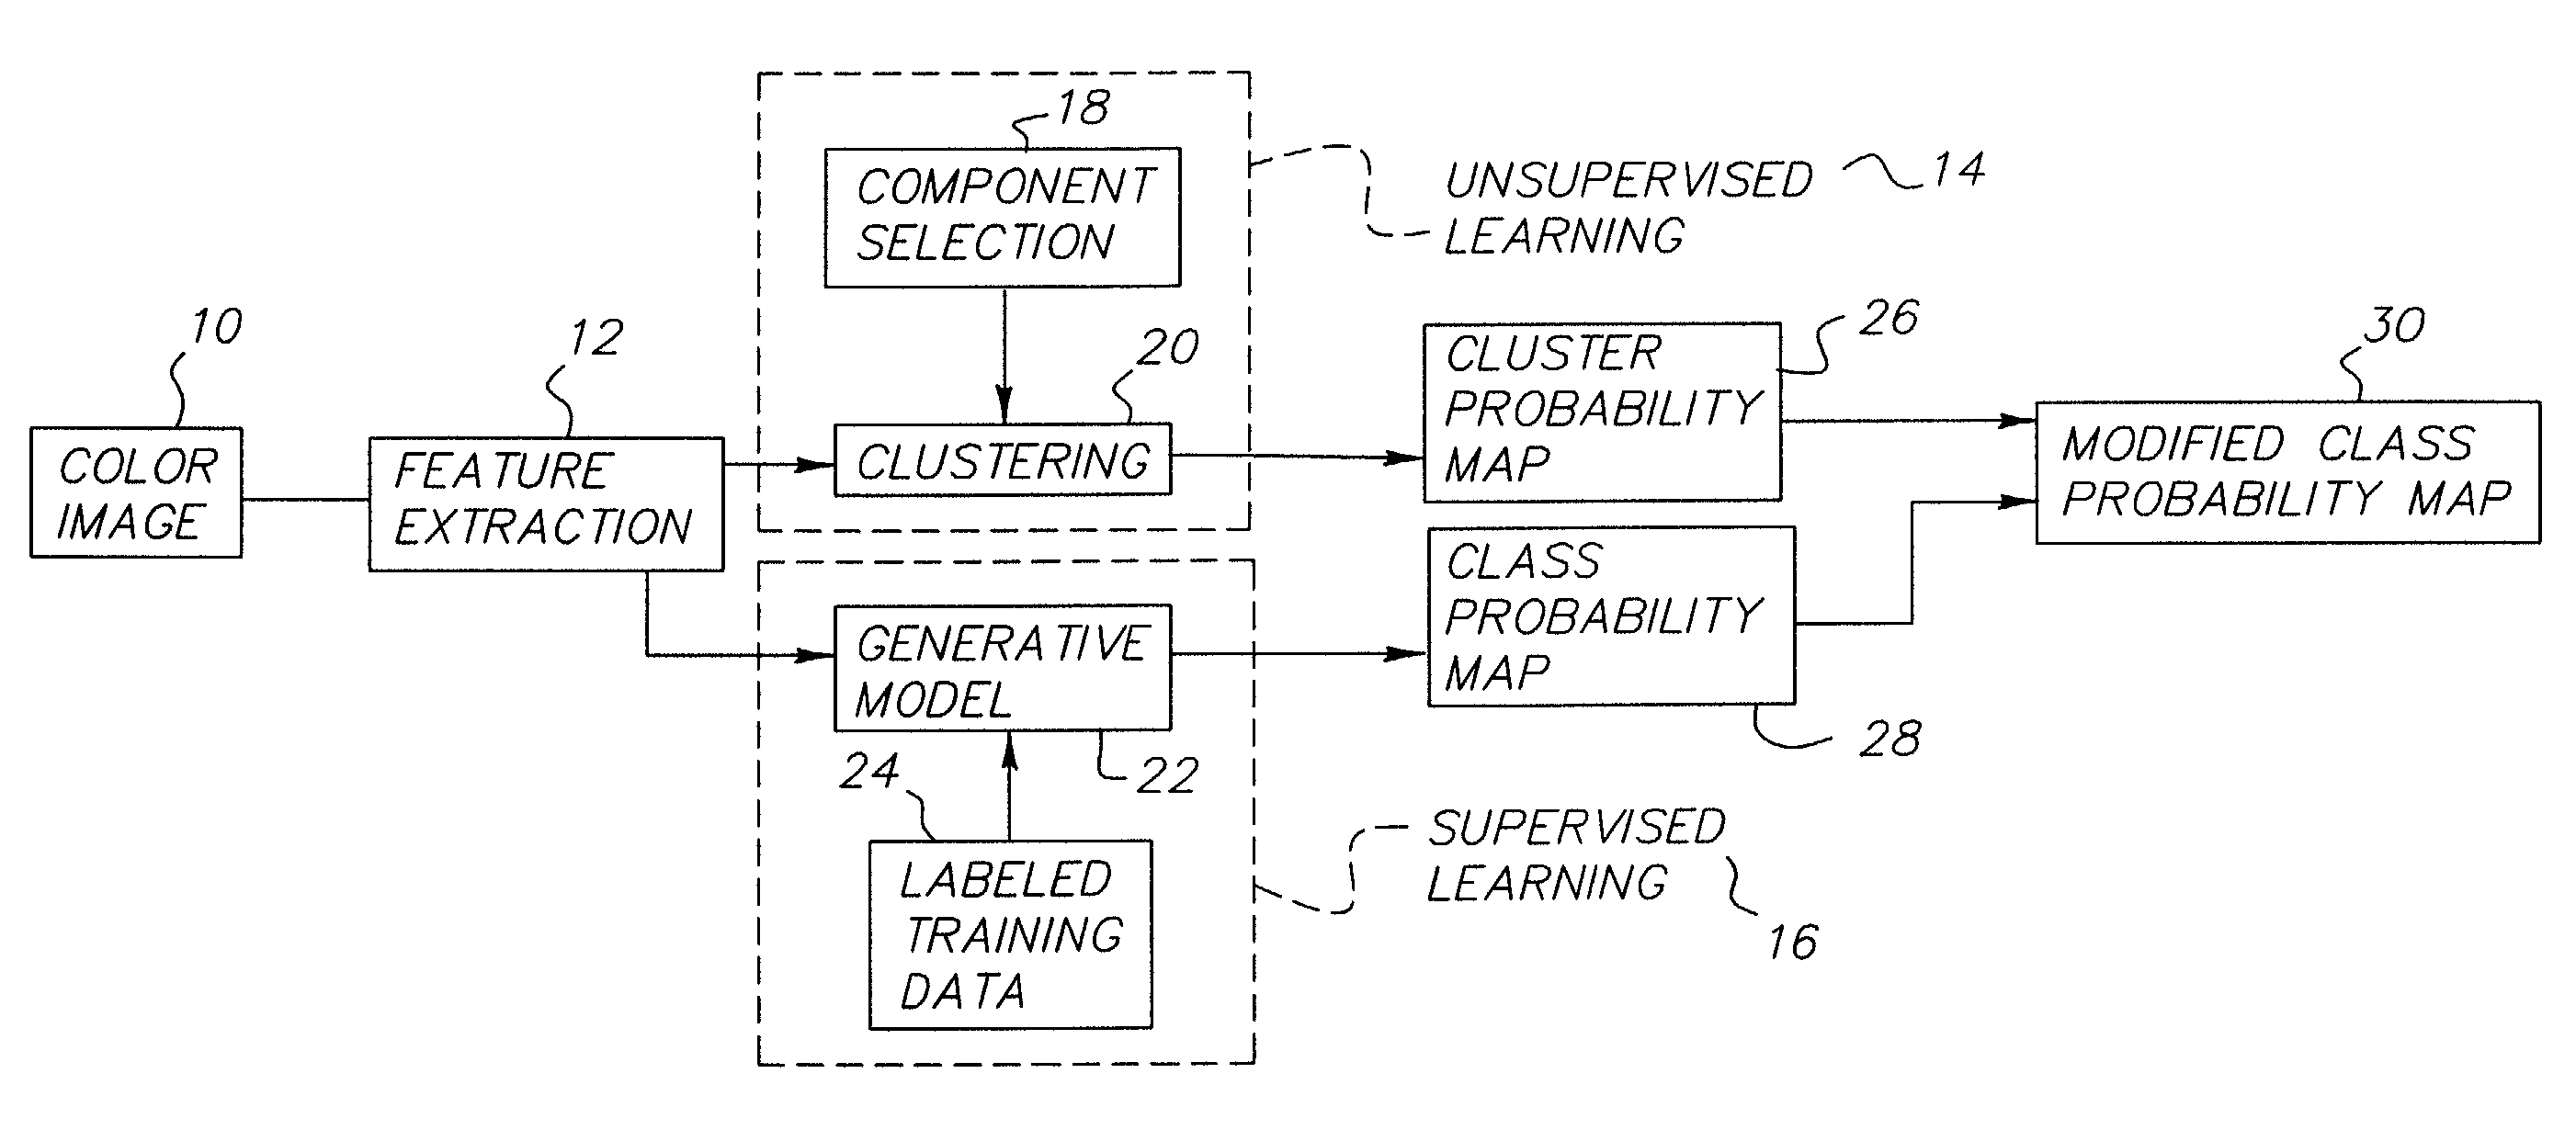 Method for image region classification using unsupervised and supervised learning